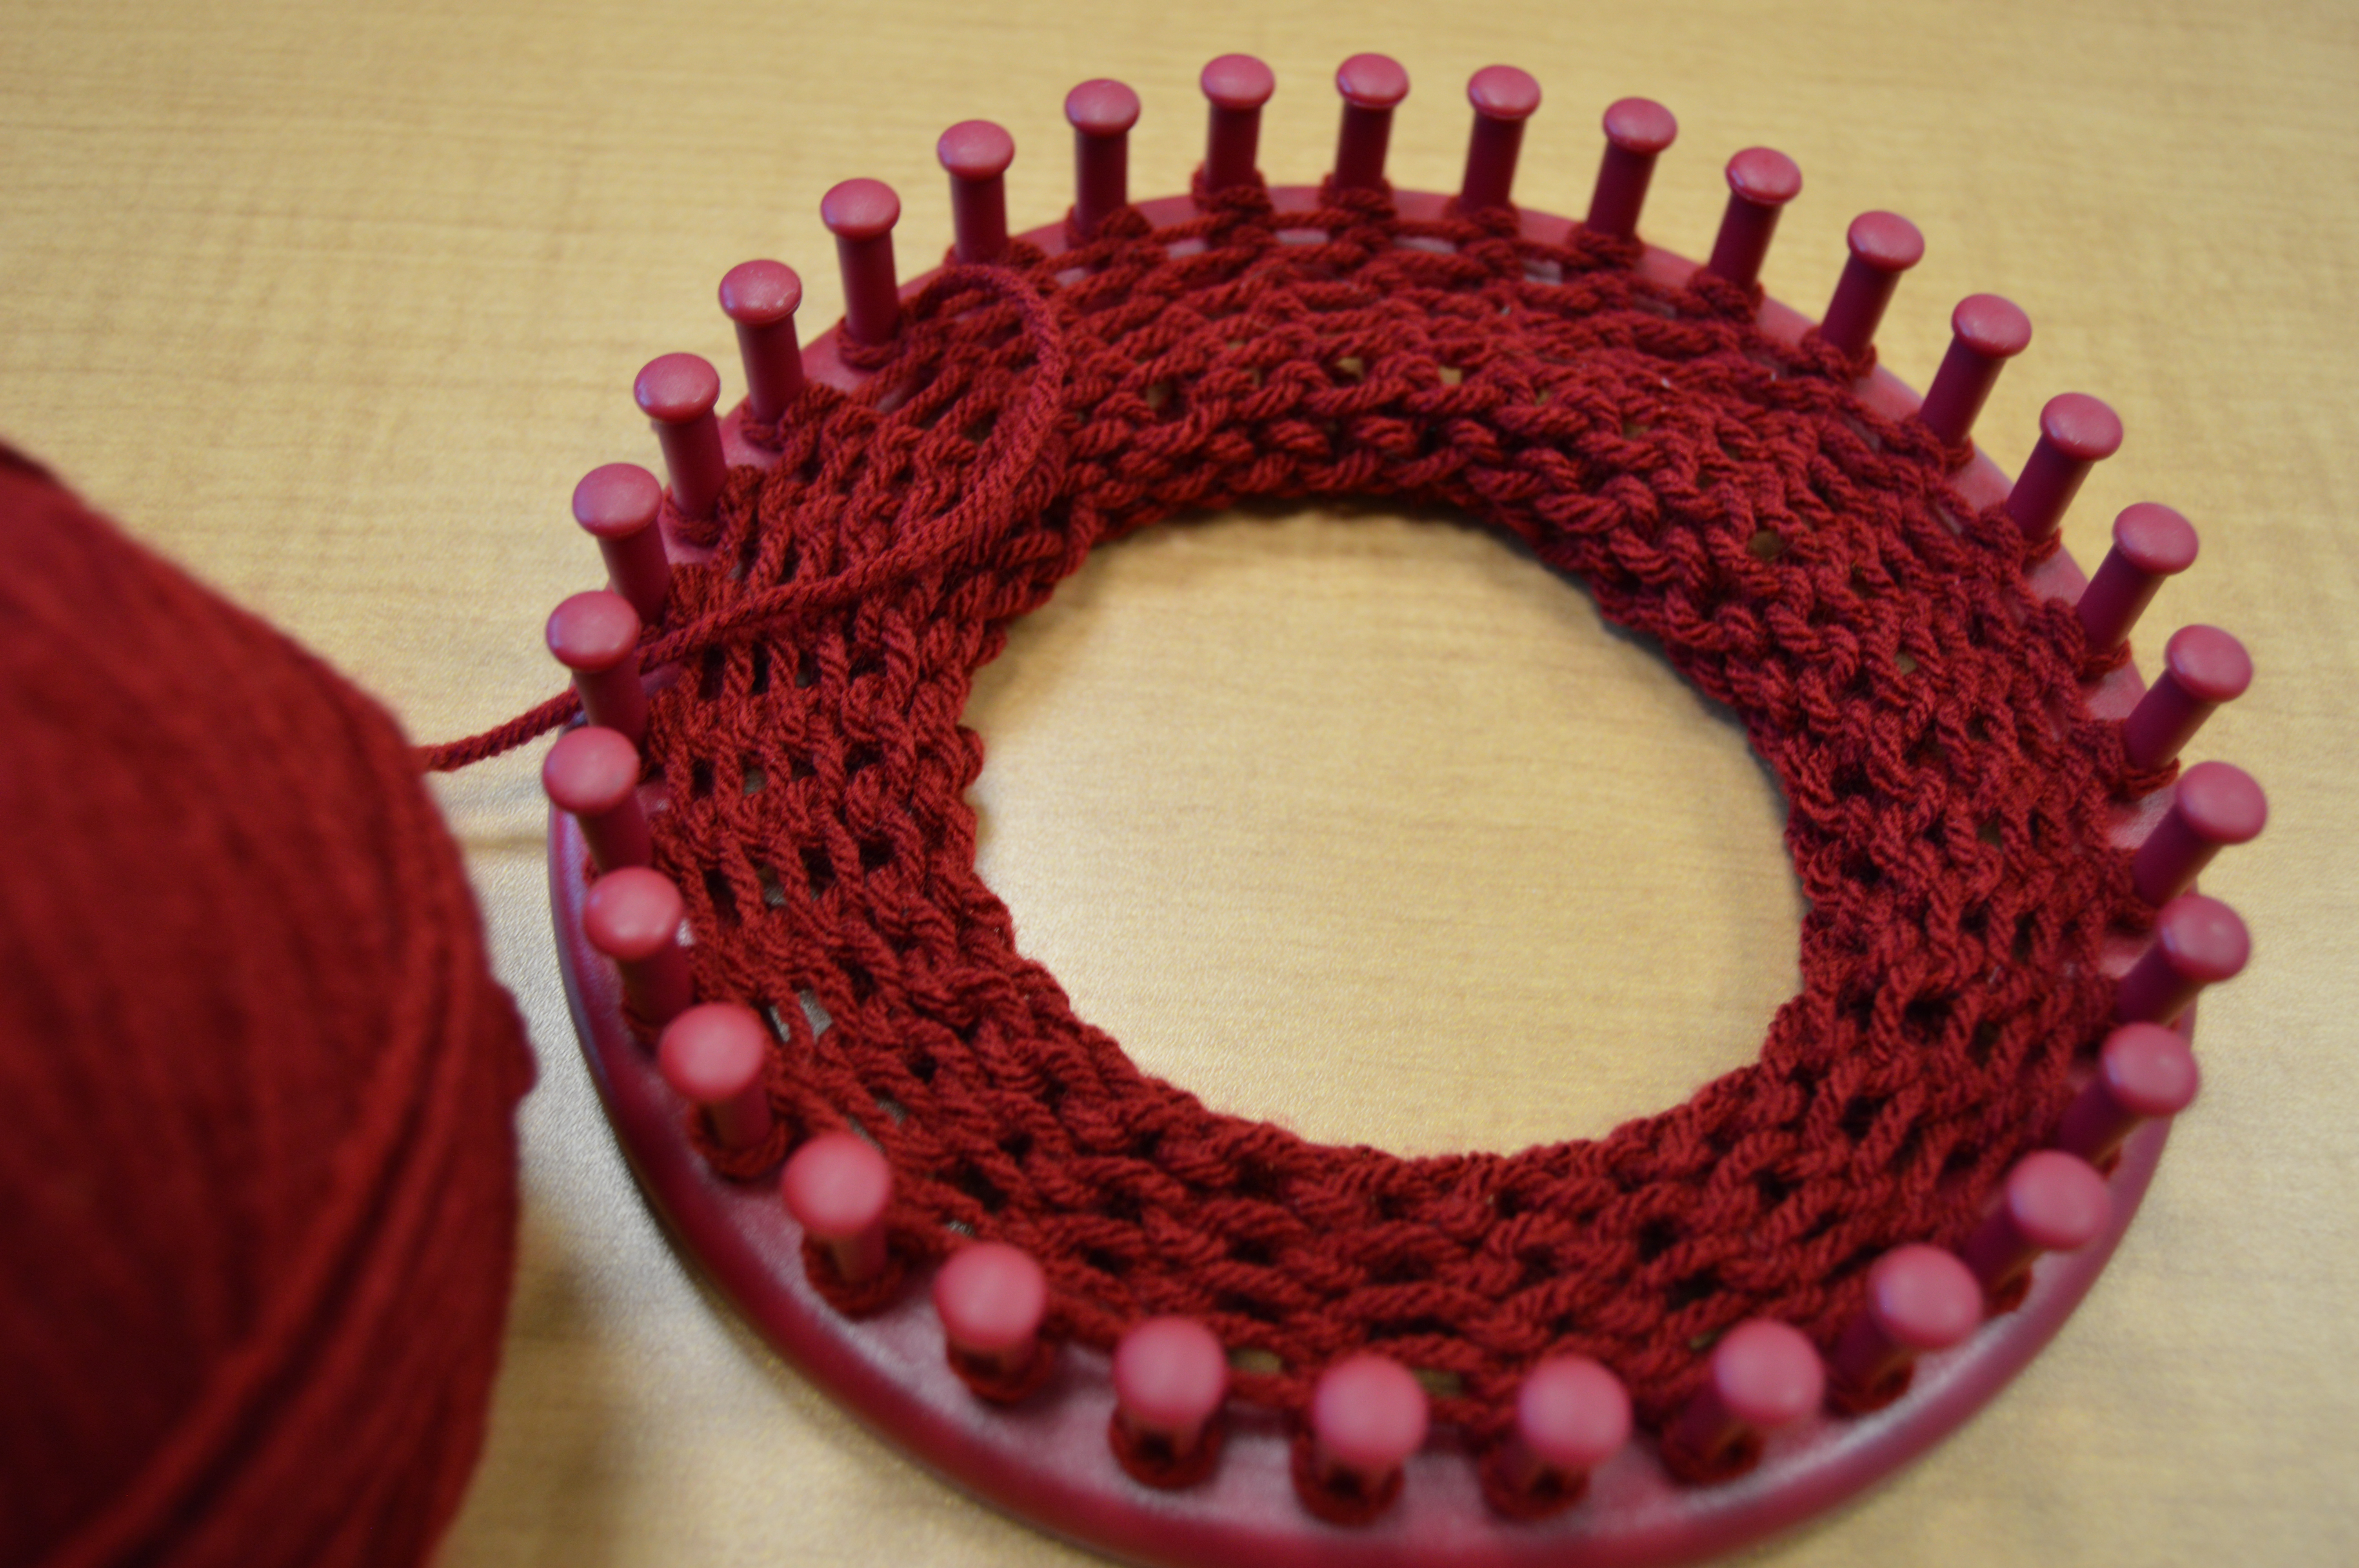 Round knitting loom with red yarn